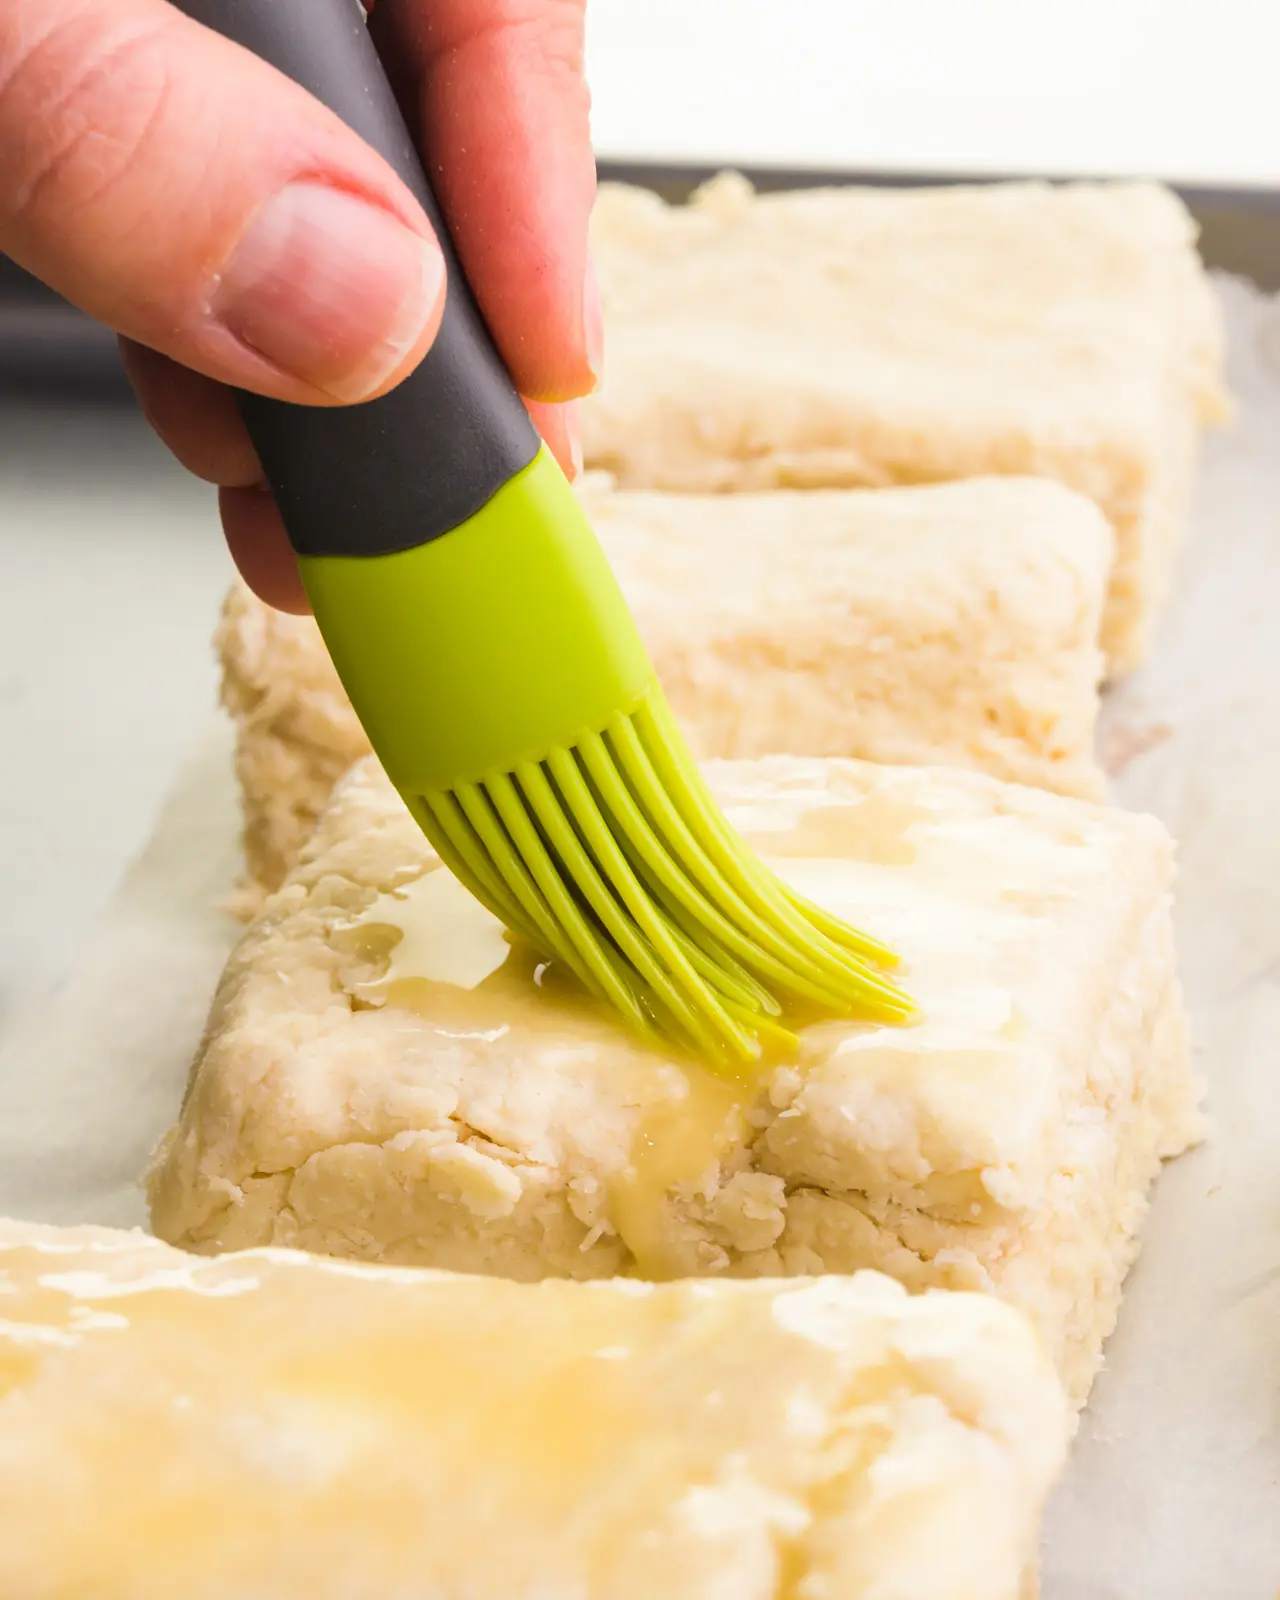 A hand holds a pastry brush and is spreading vegan egg wash over biscuit dough.